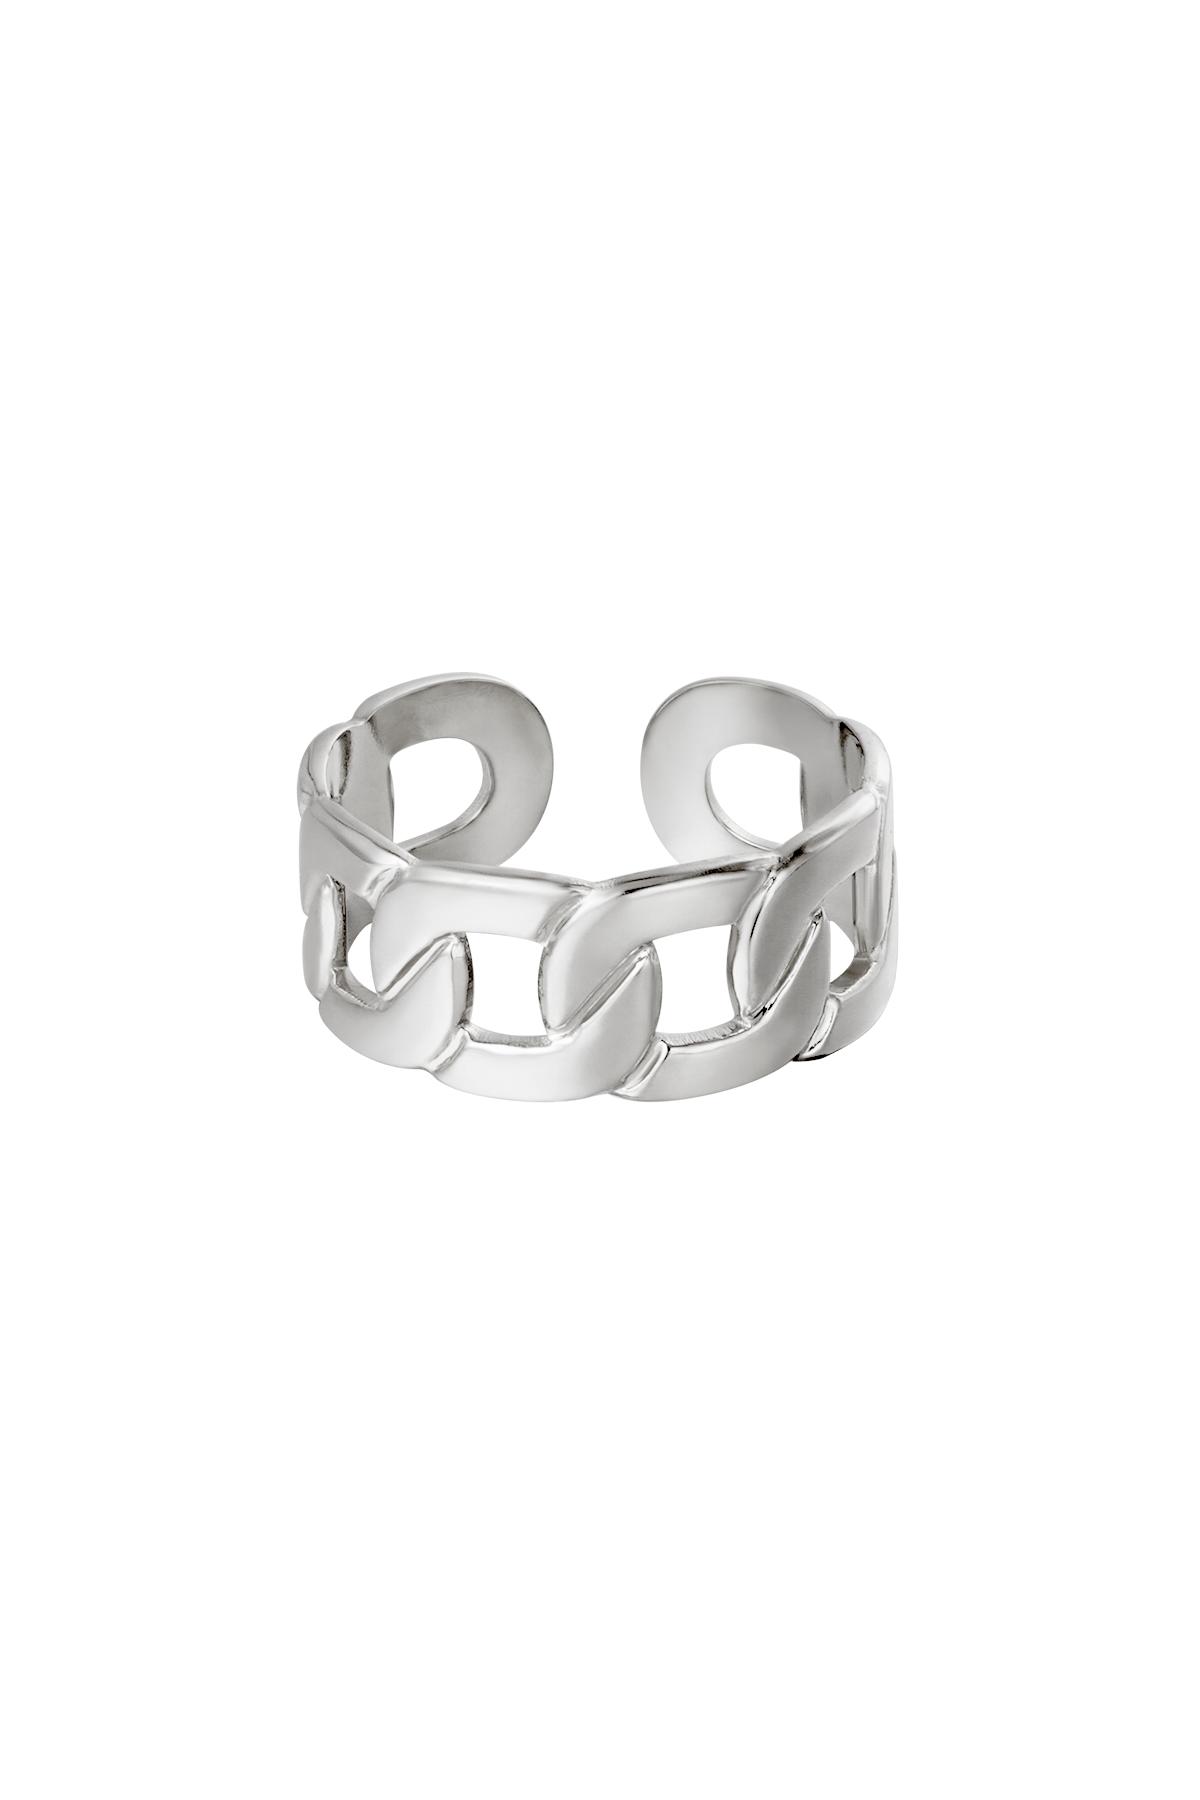 Ring Lux Silver Stainless Steel One size h5 